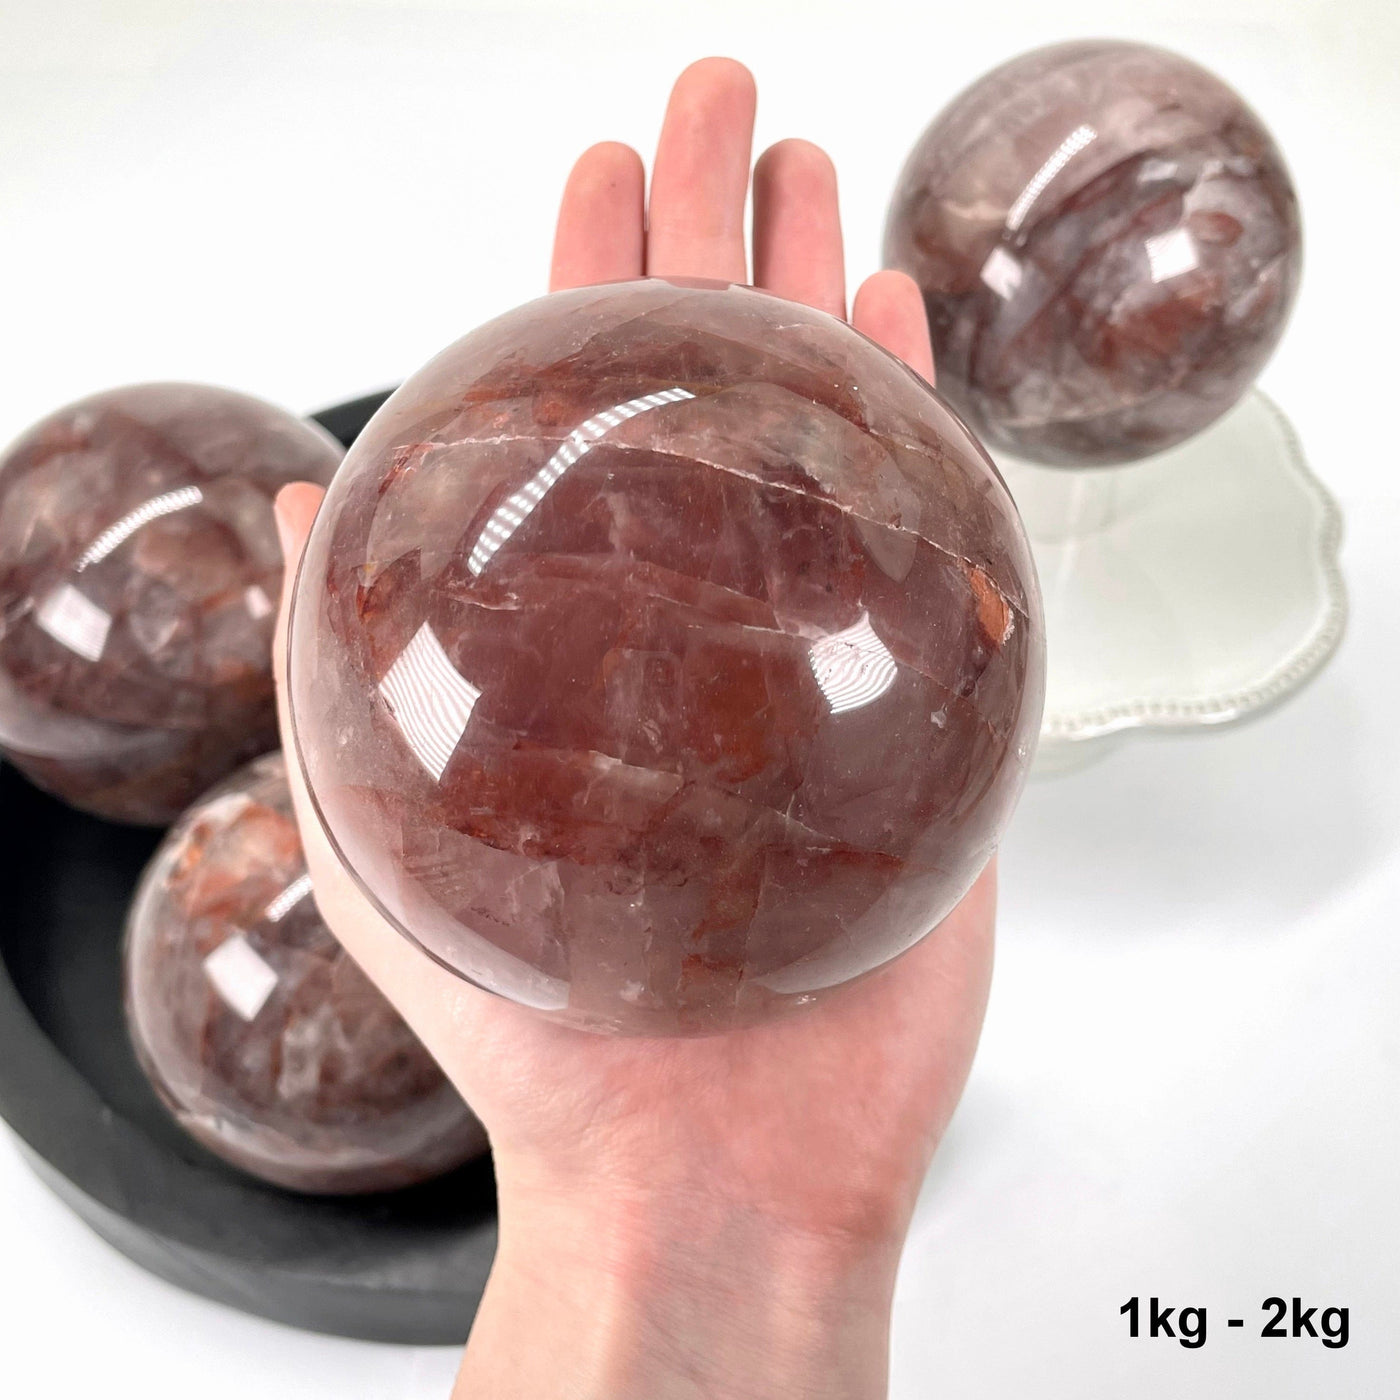 one 1kg - 2kg guava polished sphere in hand for size reference with others in background display